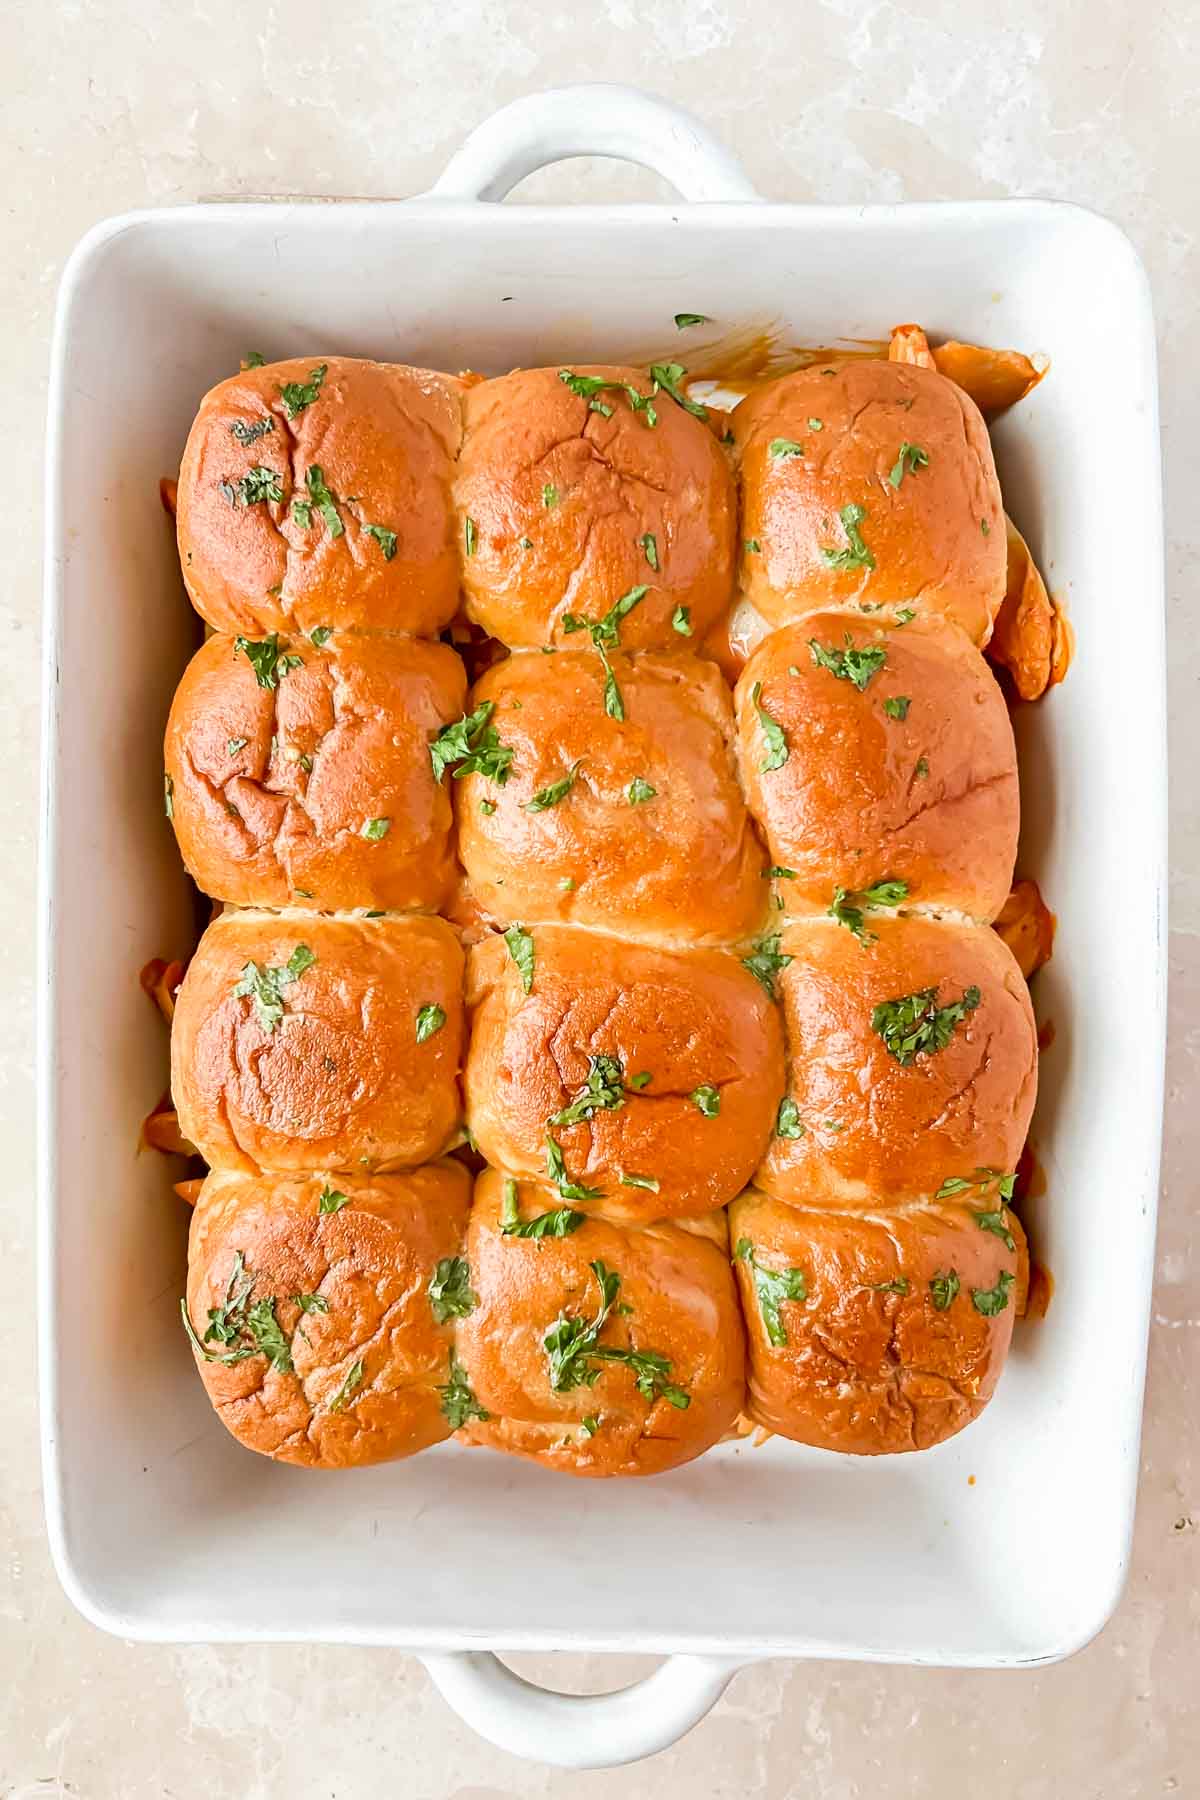 pan full of buffalo chicken sliders garnished with fresh herbs.